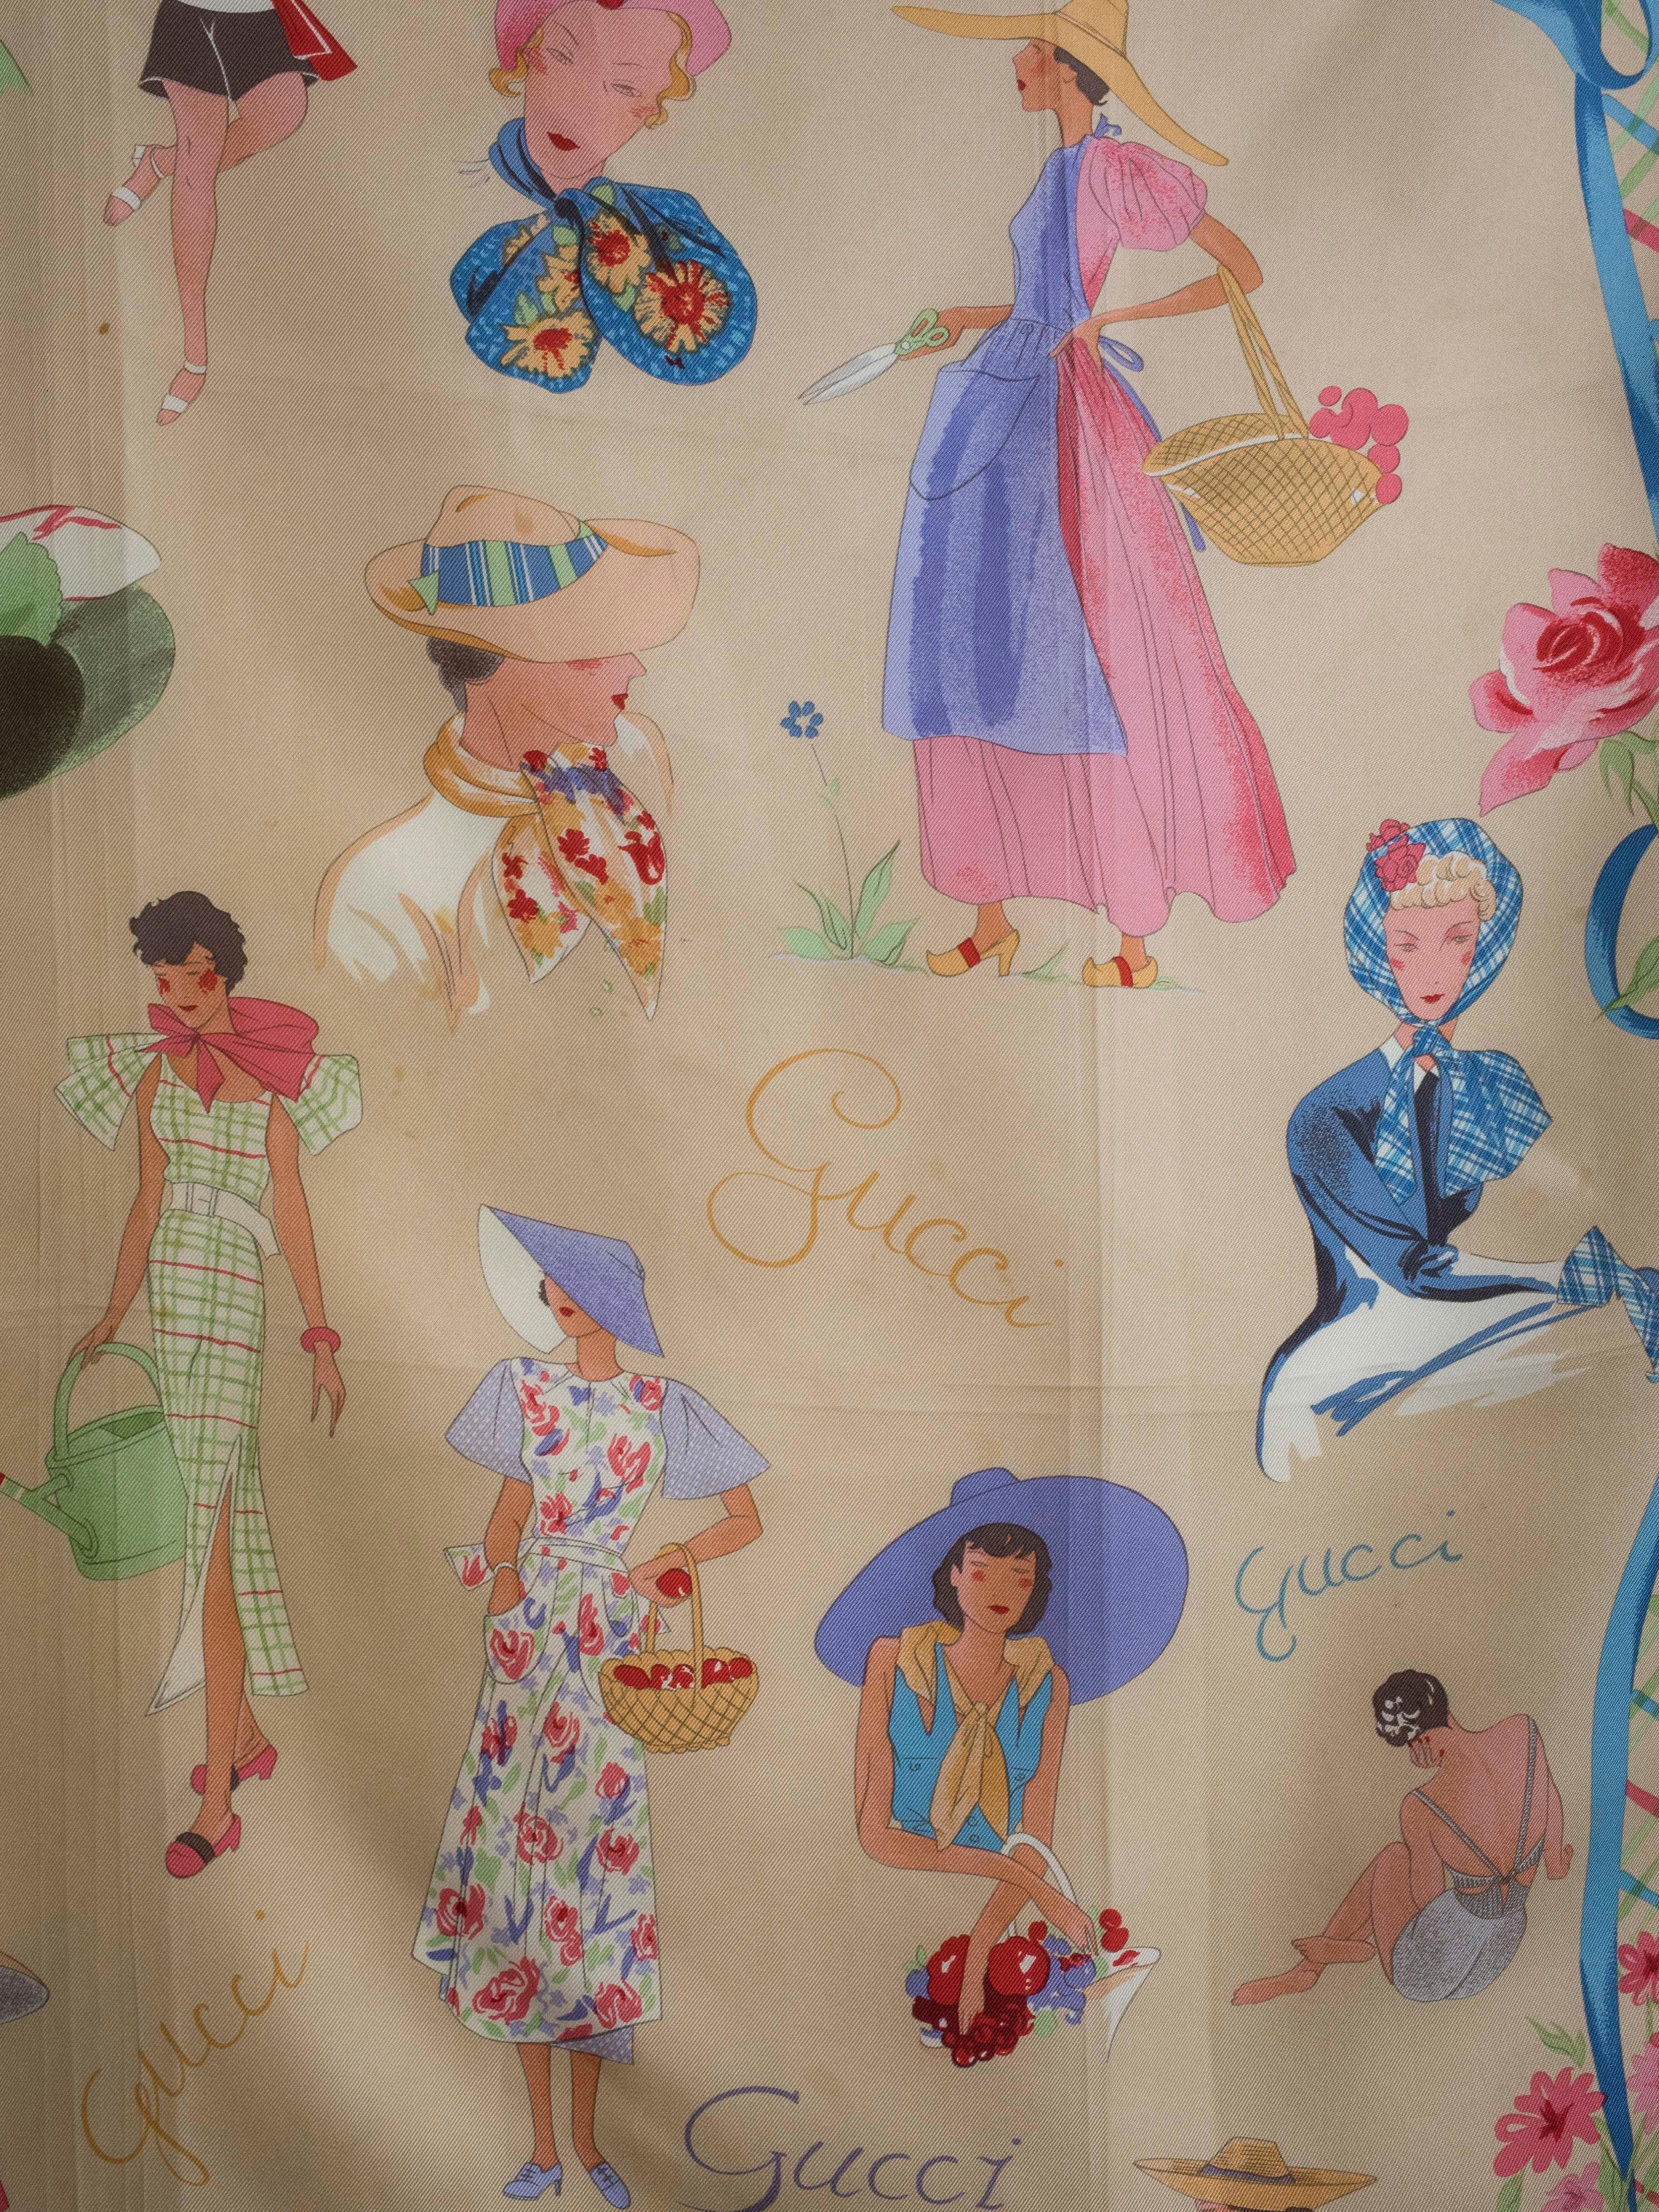 Vintage silk scarf by Gucci. Features charming print of women in 1940s style dress. 

Measures 34” square
